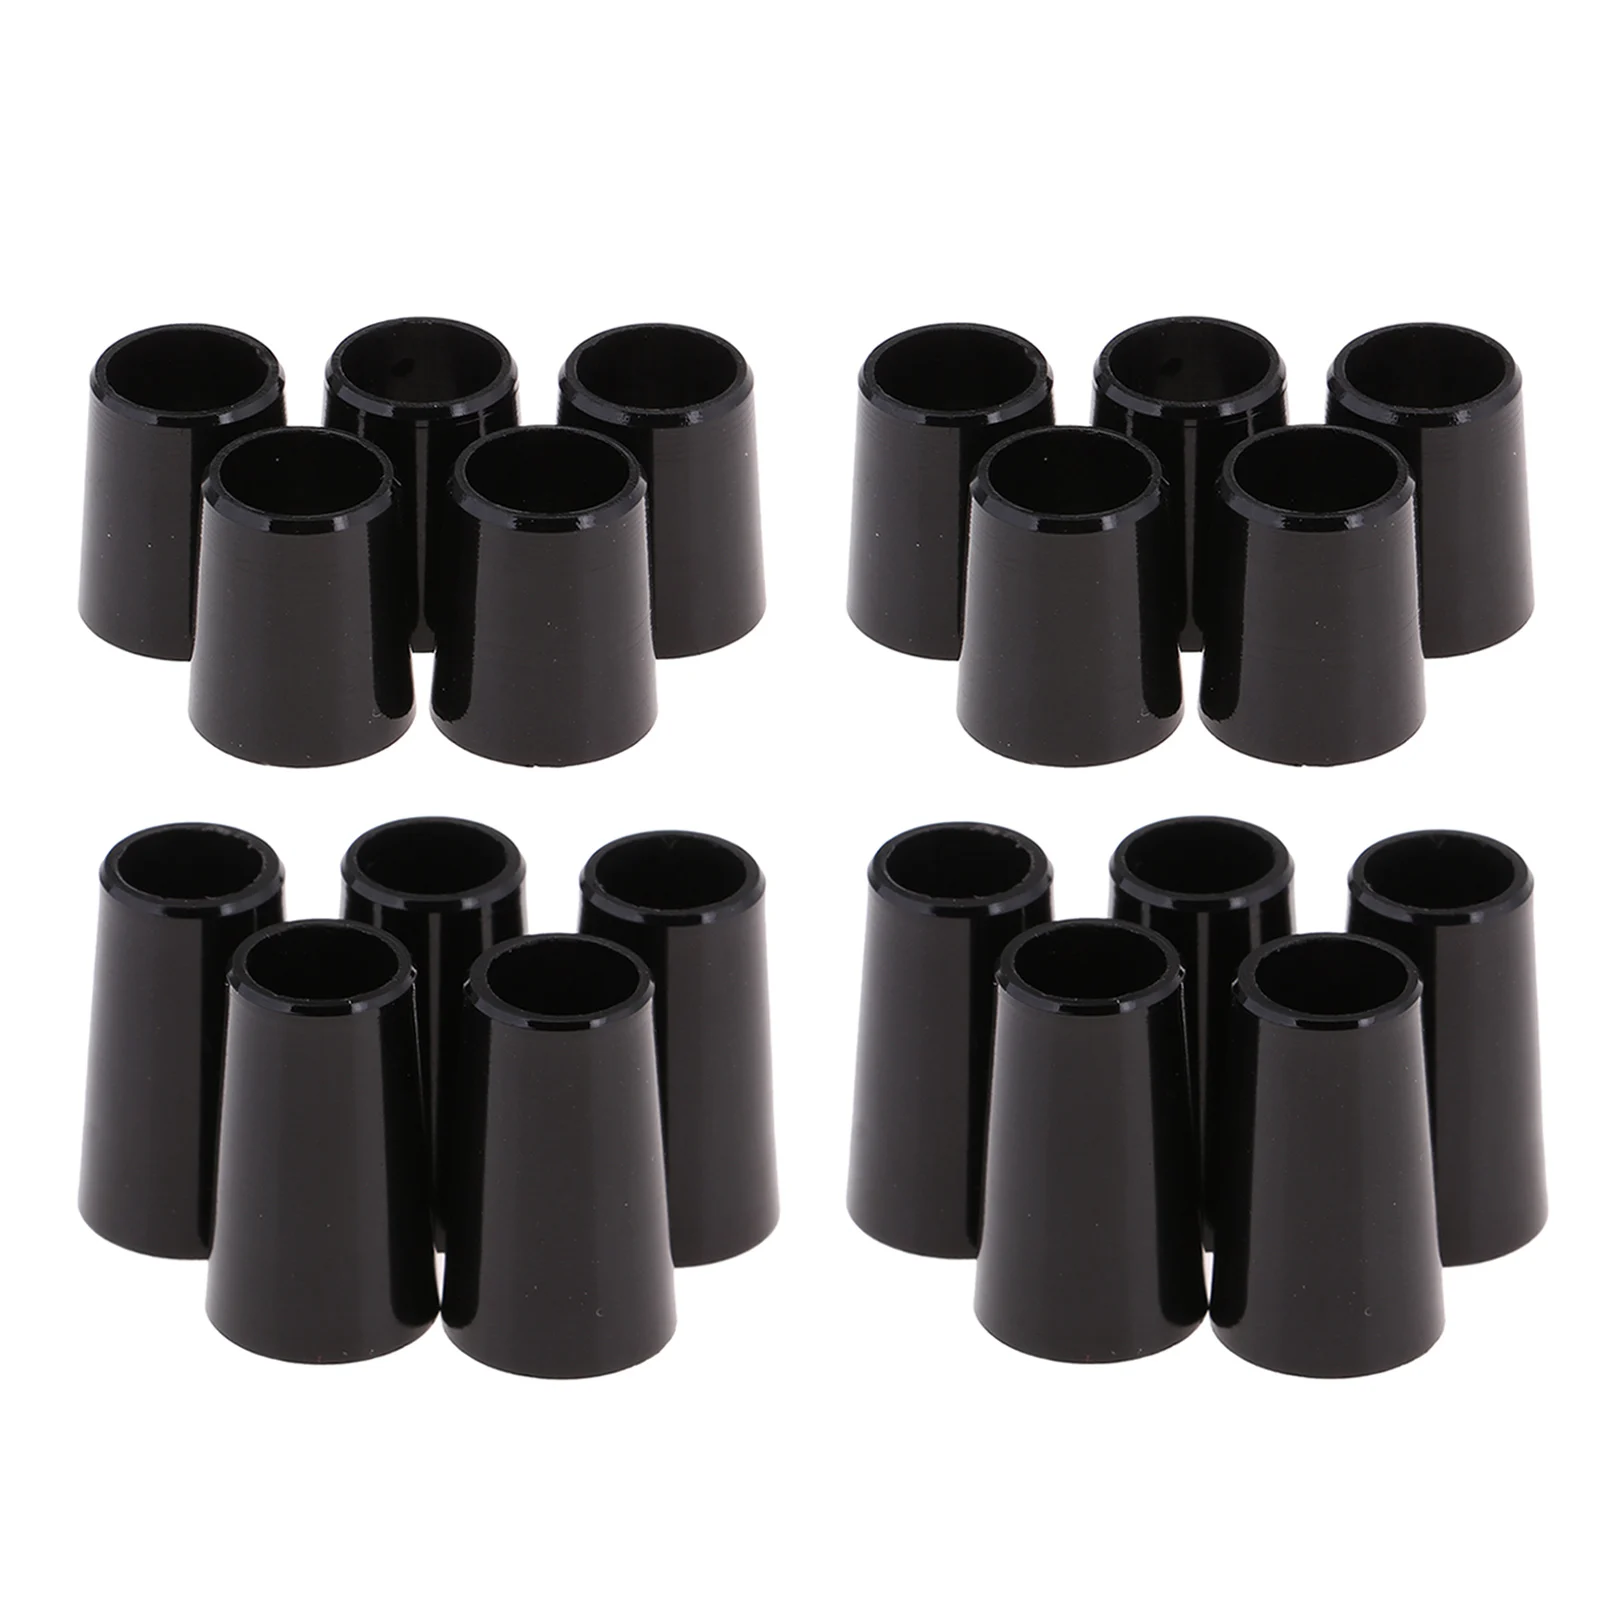 20 Pack .370/.335 Black Golf Ferrules for Irons Wood Shafts Club Accessories